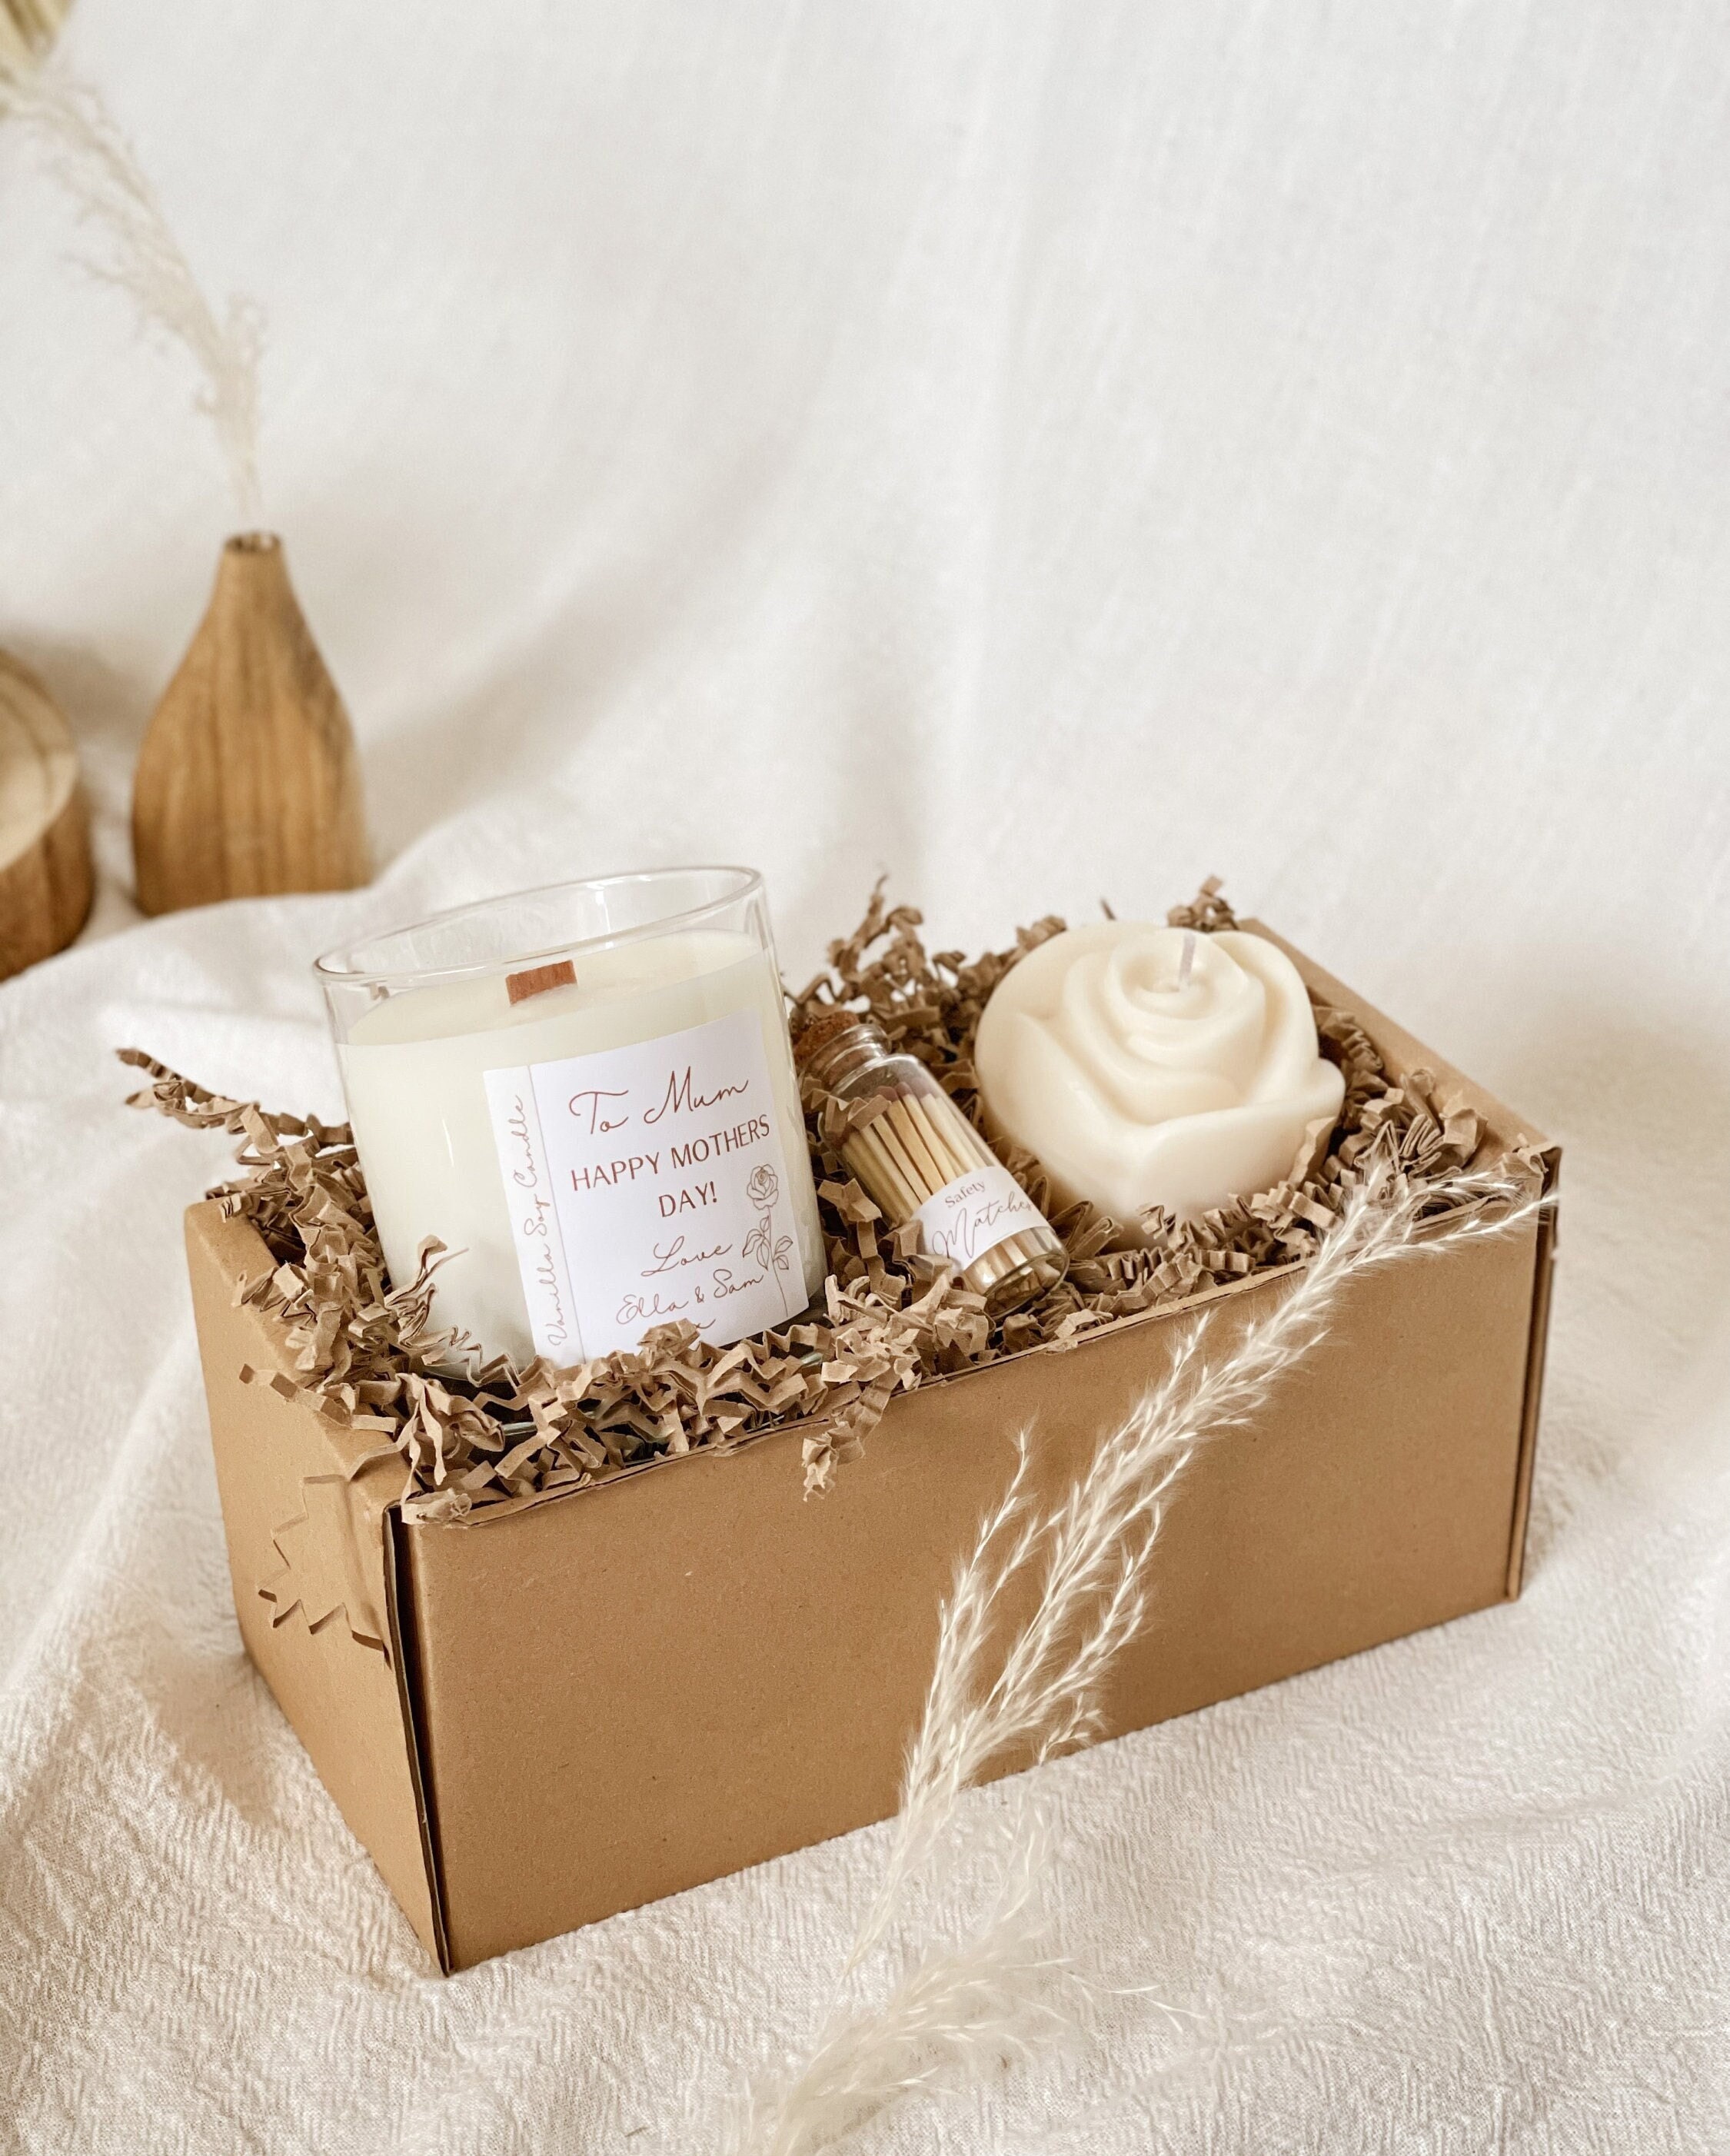 Small Jar Candle, Candles for Gift Box, California